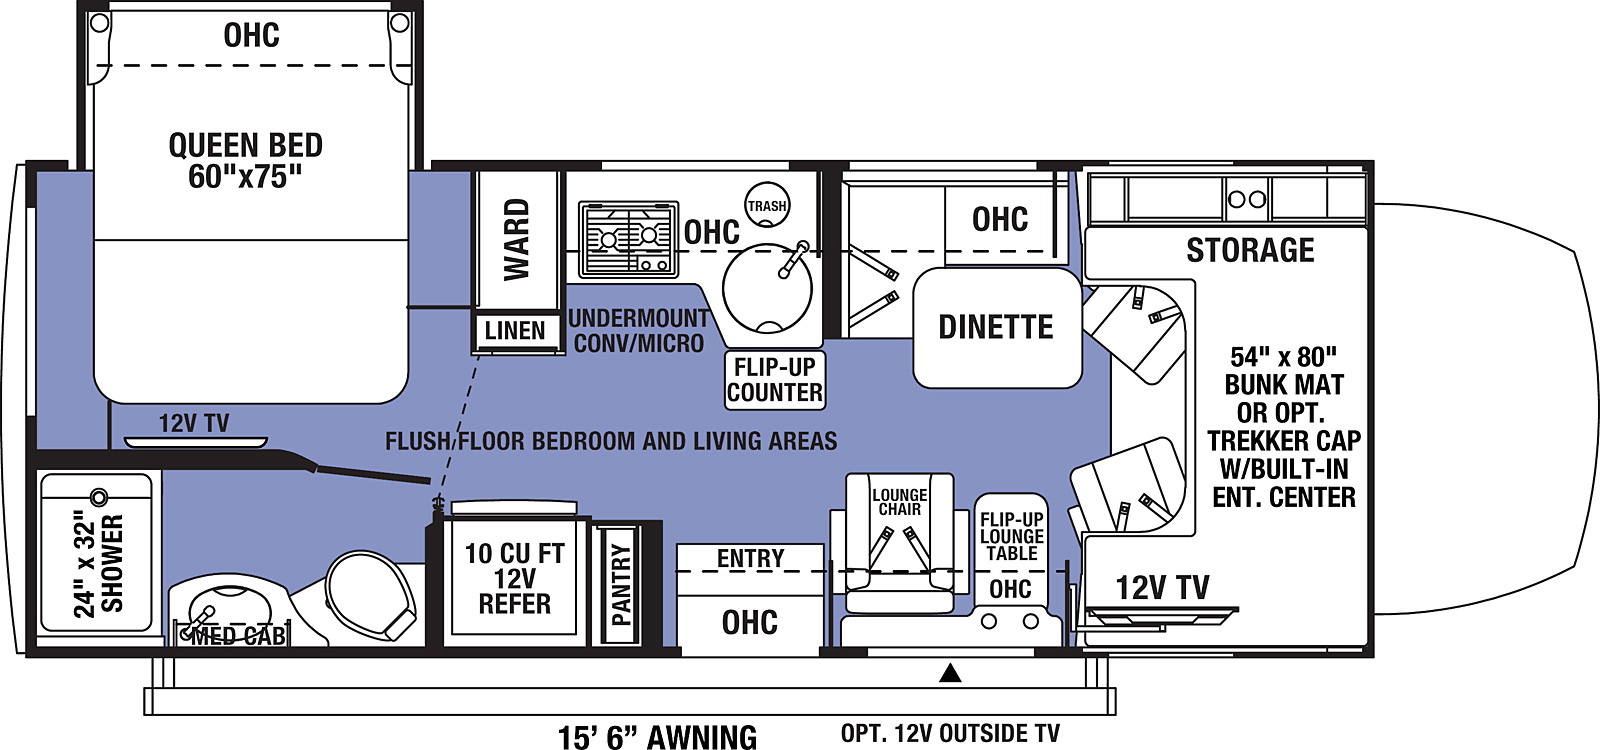 Sunseeker MBS 2400Q floorplan. The 2400Q has one slide out and one entry door.